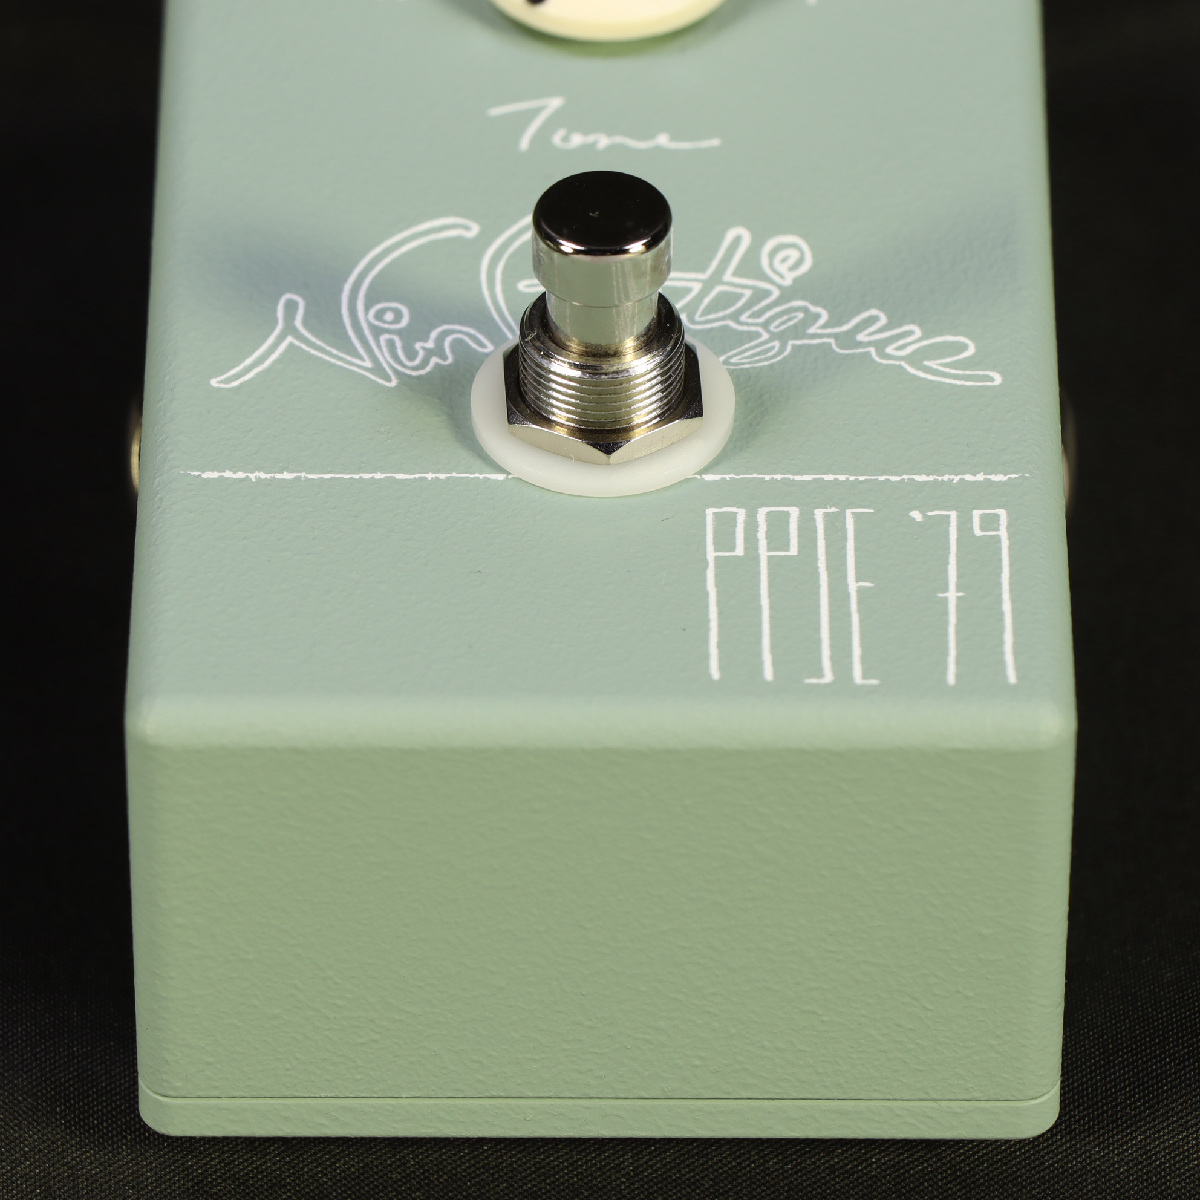 Vin-Antique / PPSE'79 Ver.3 Pike Place Smoky Emerald 1979 ヴィンアンティーク